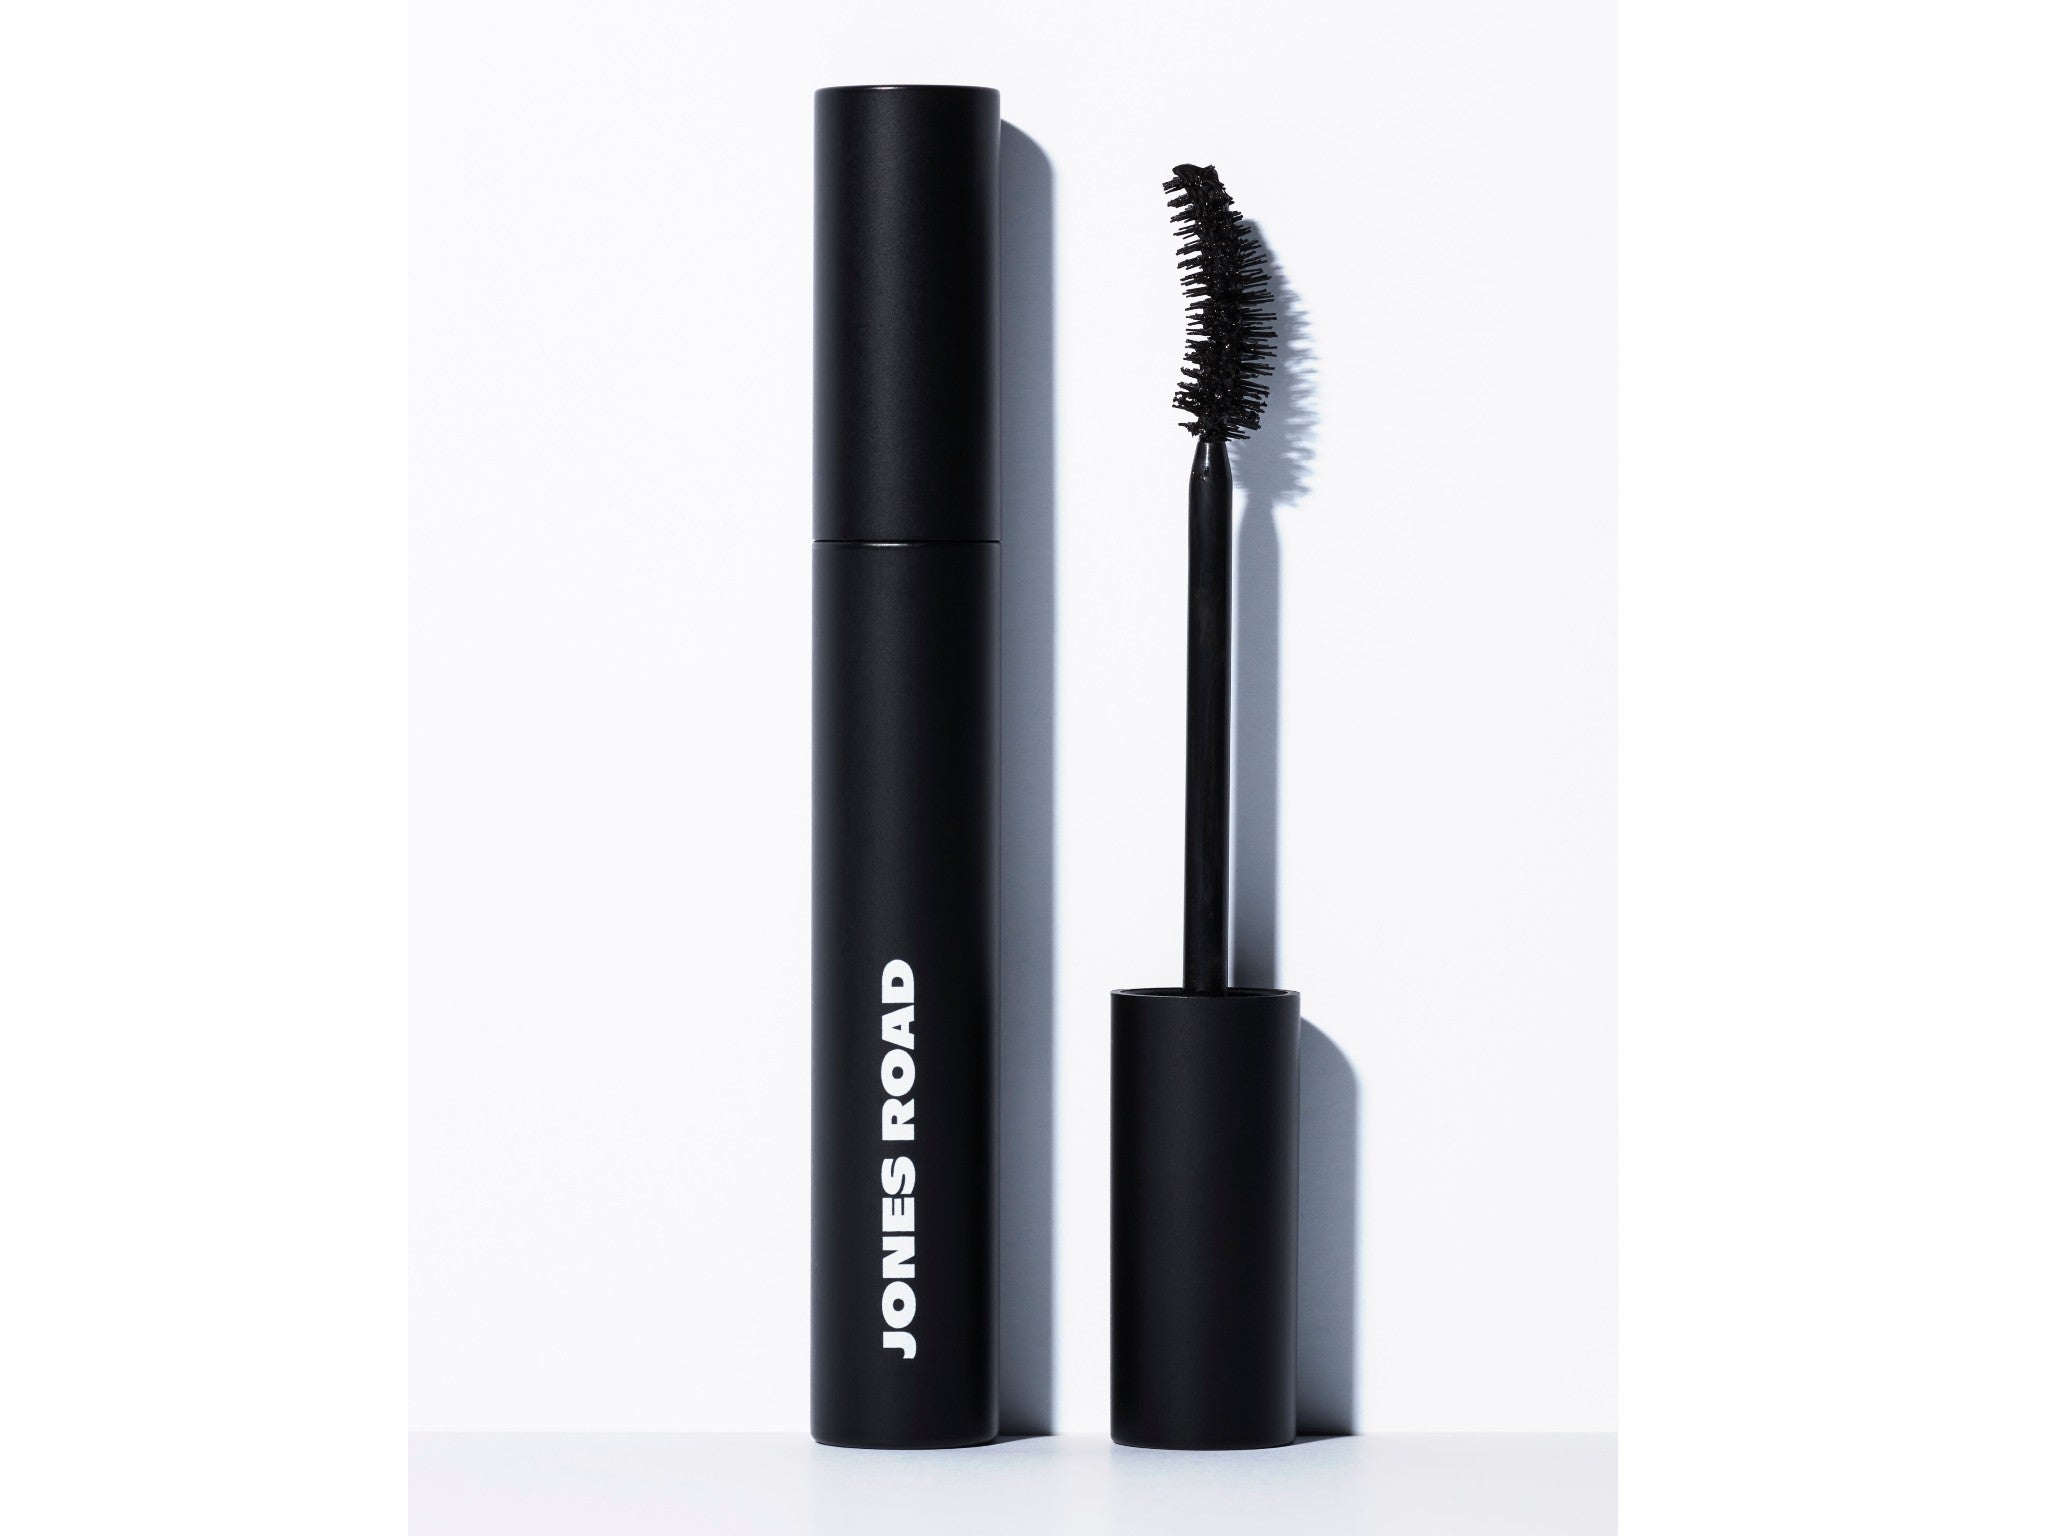 Best mascara 2023: For long, full lashes with volume